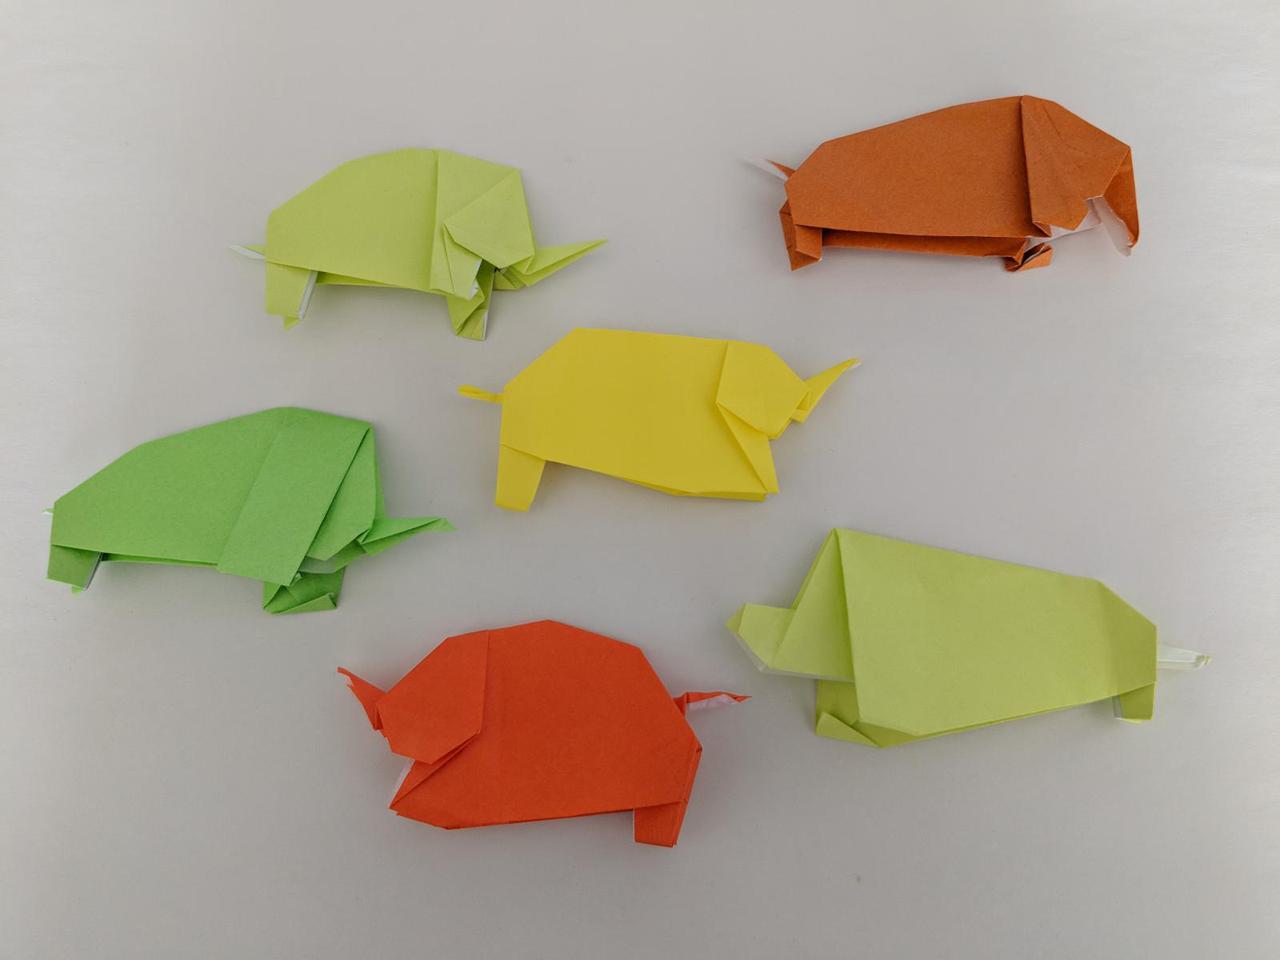 collection of origami shapes that all look elephant like, with slightly different ears or legs in each case.